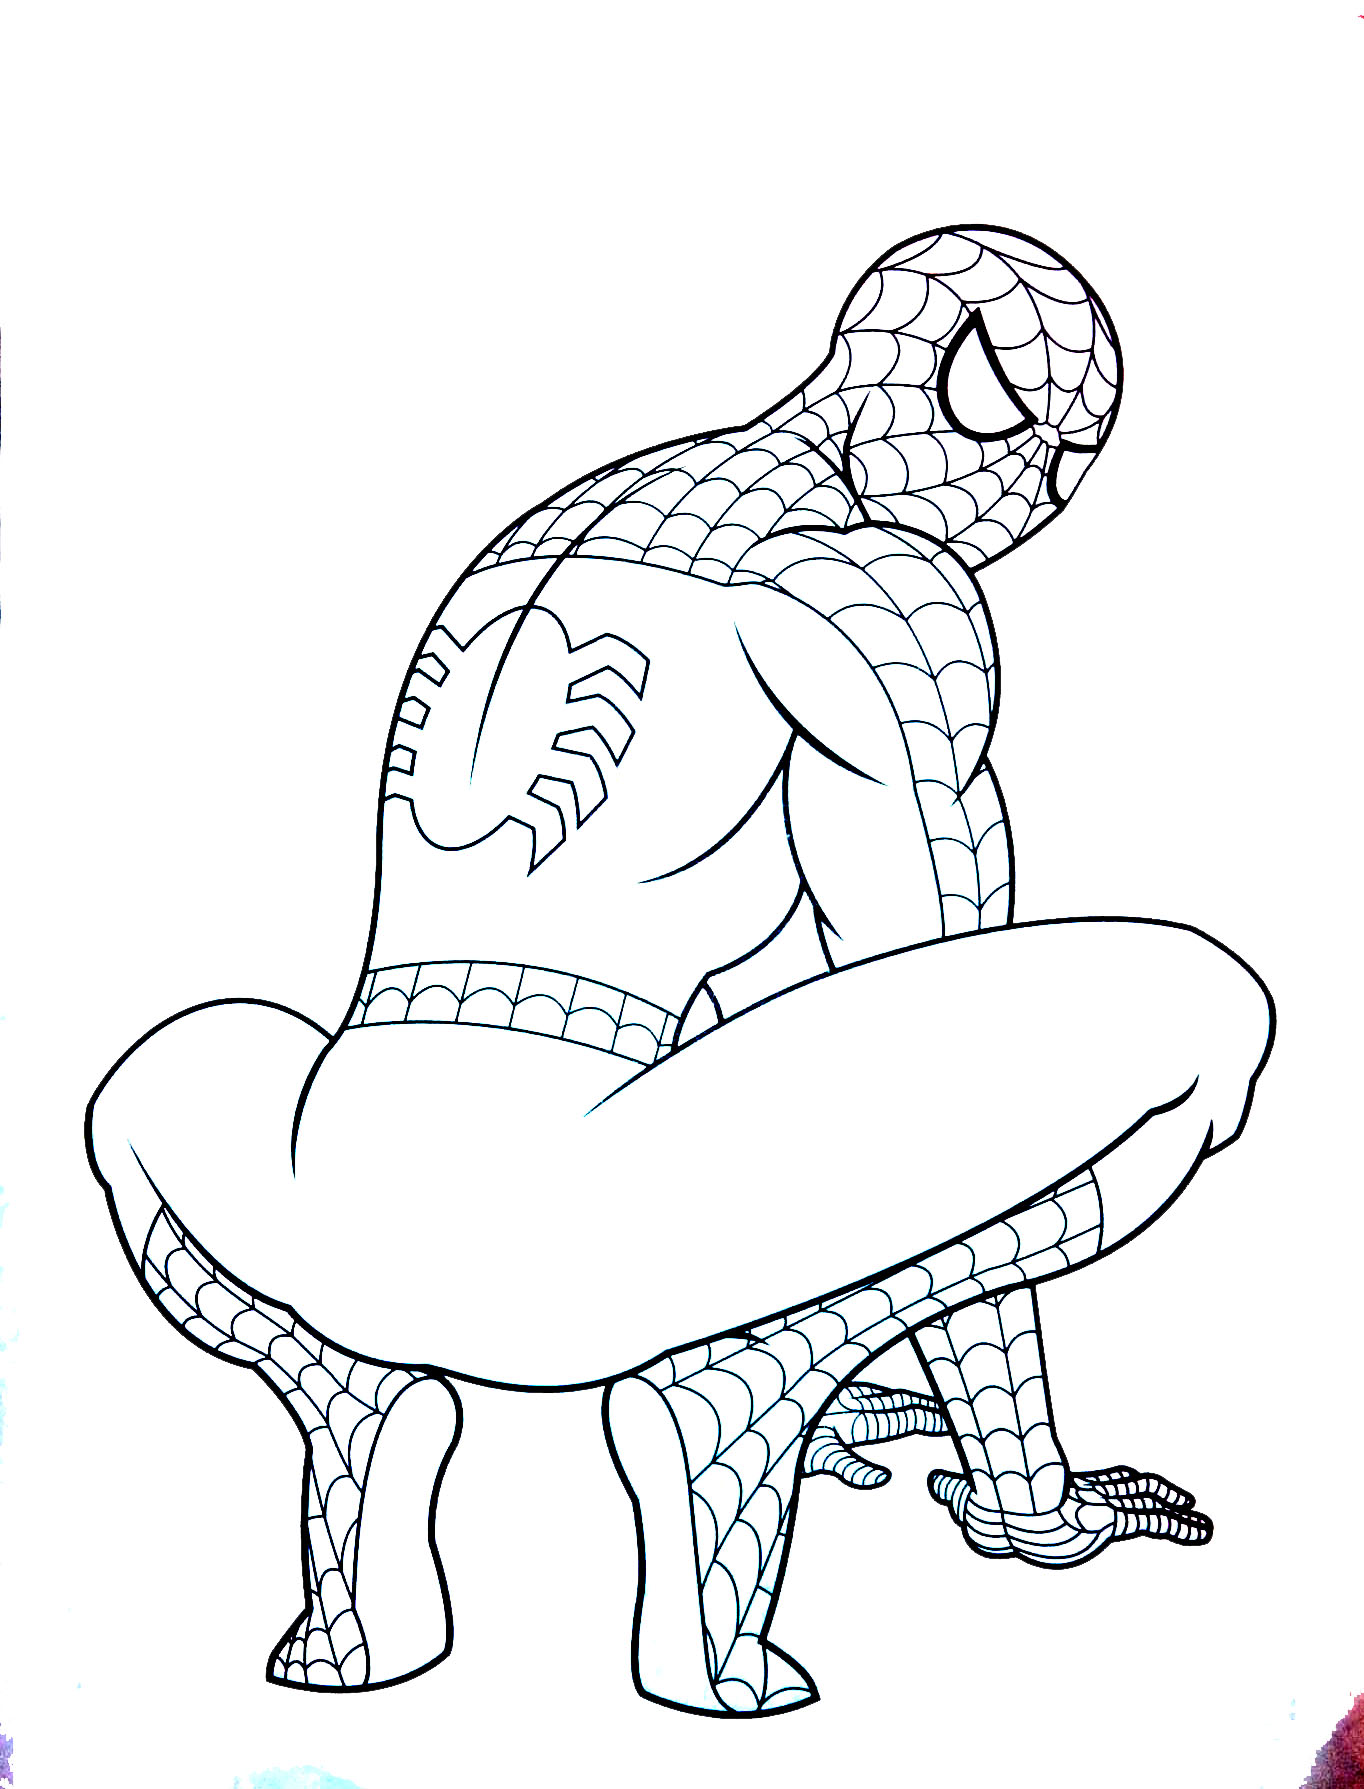 Coloring for kids spiderman is new